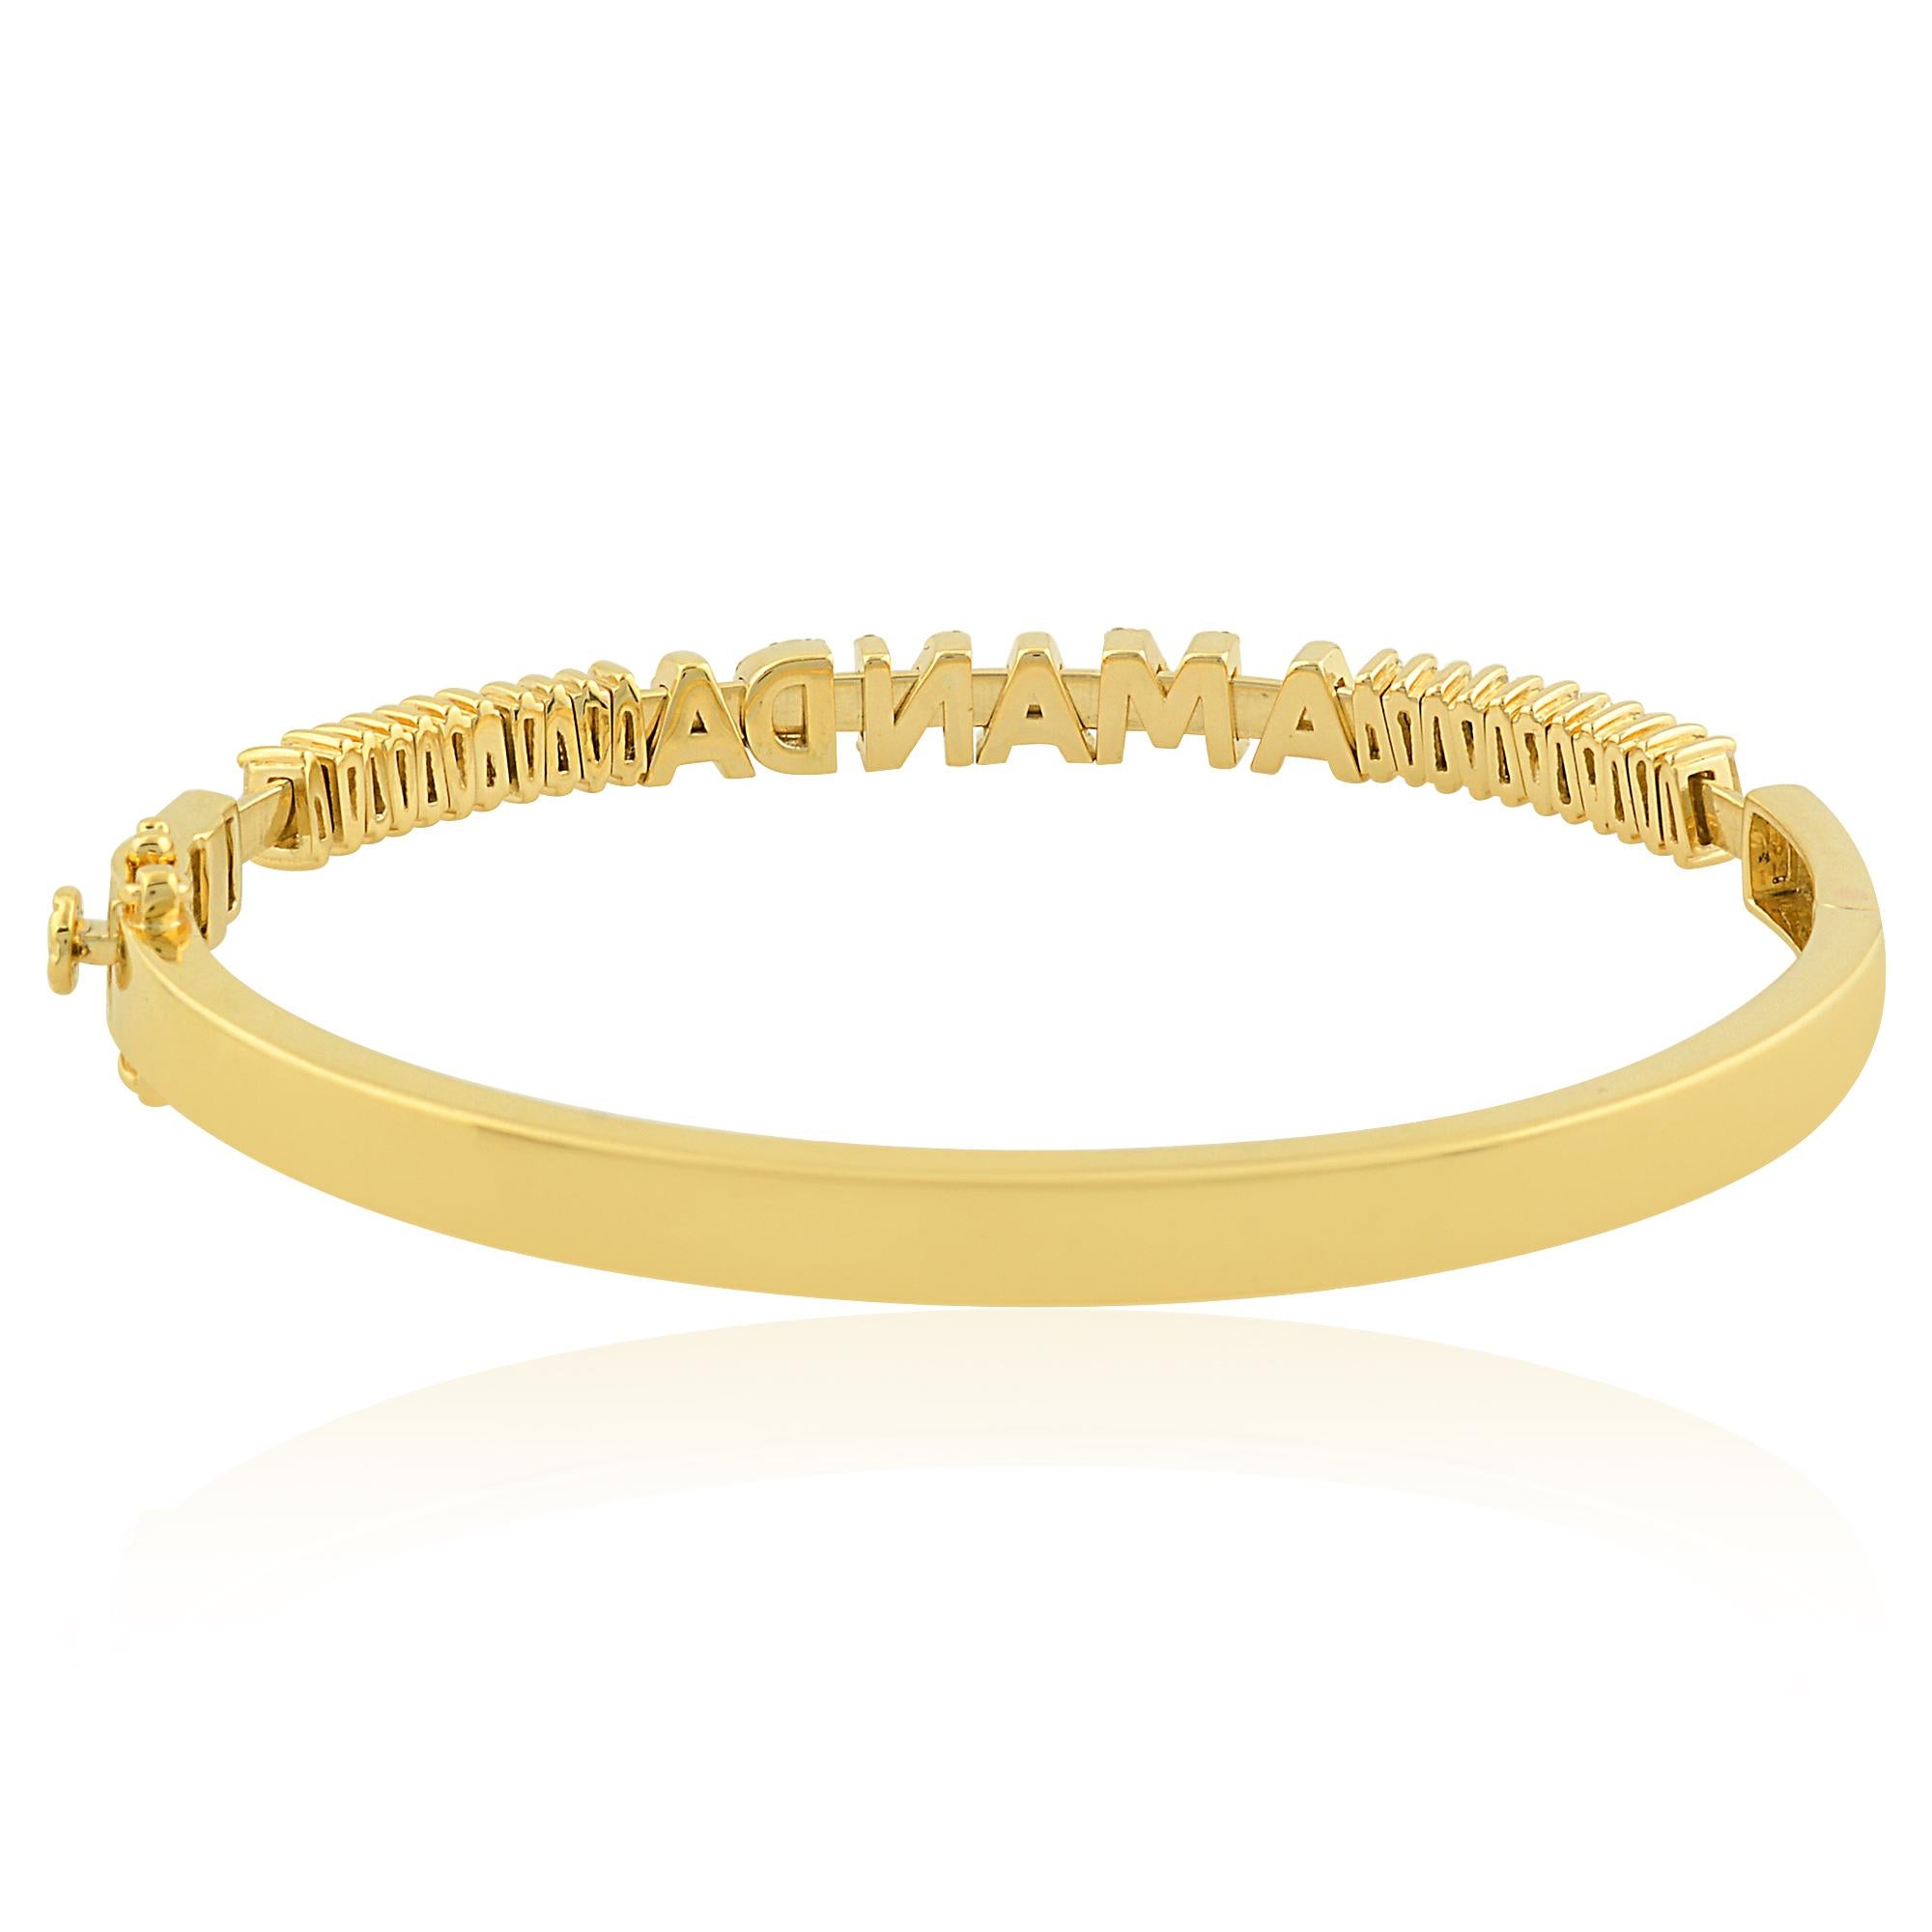 Indulge in the timeless elegance of this exquisite SI clarity, HI color tapered baguette diamond name bracelet crafted in 14 karat yellow gold. Each facet of this luxurious piece is meticulously designed to captivate the eye and adorn the wrist with